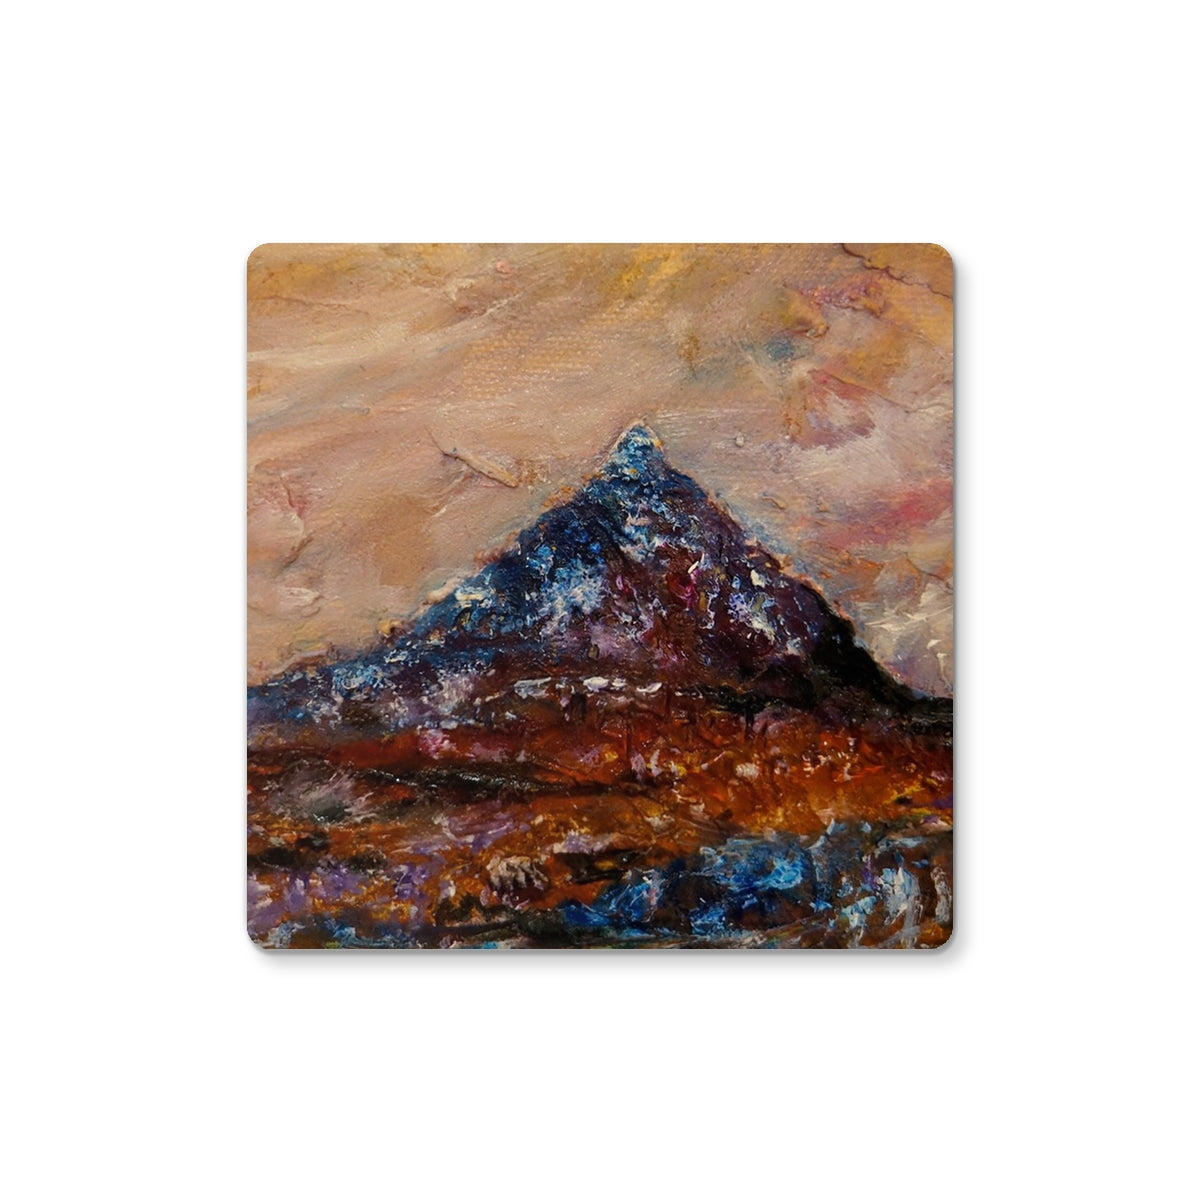 Buachaille Etive Mòr Art Gifts Coaster-Coasters-Glencoe Art Gallery-2 Coasters-Paintings, Prints, Homeware, Art Gifts From Scotland By Scottish Artist Kevin Hunter